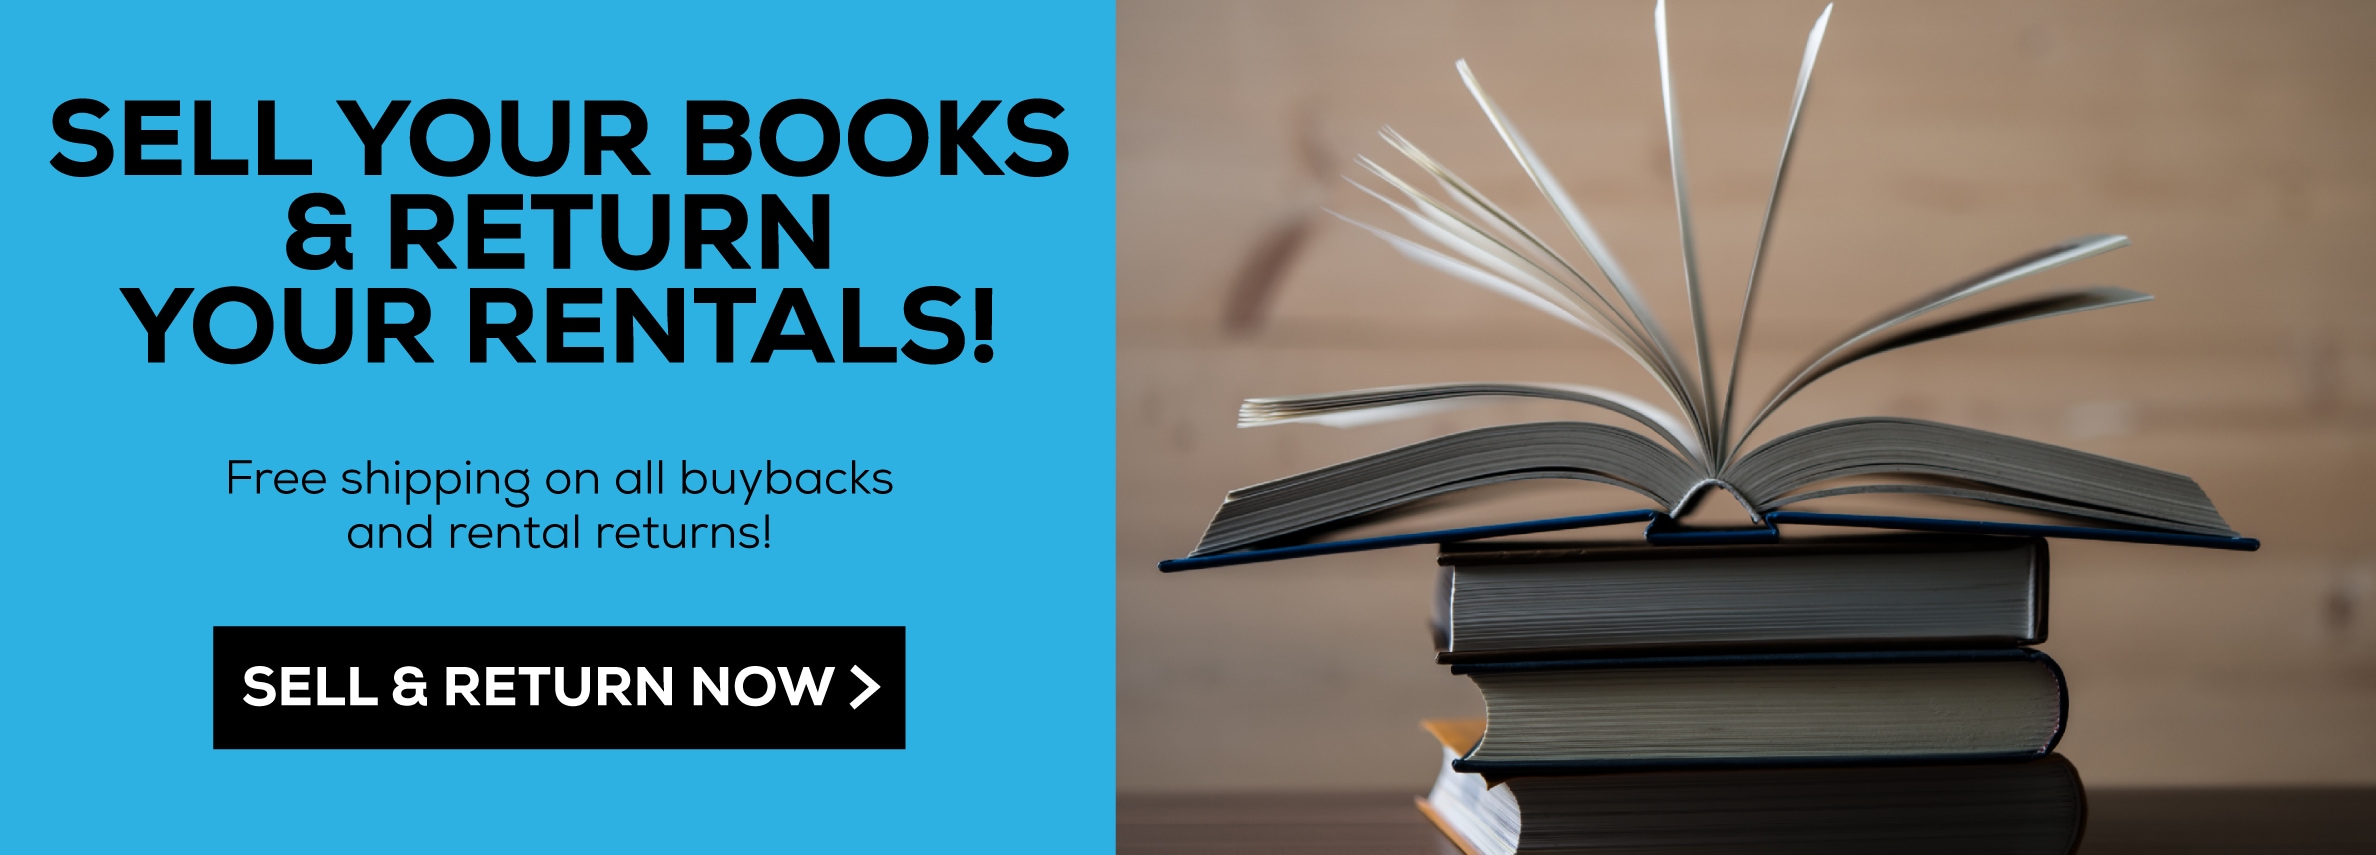 Sell your books and return your rentals. Free shipping on all buybacks and rental returns. Sell and return now.